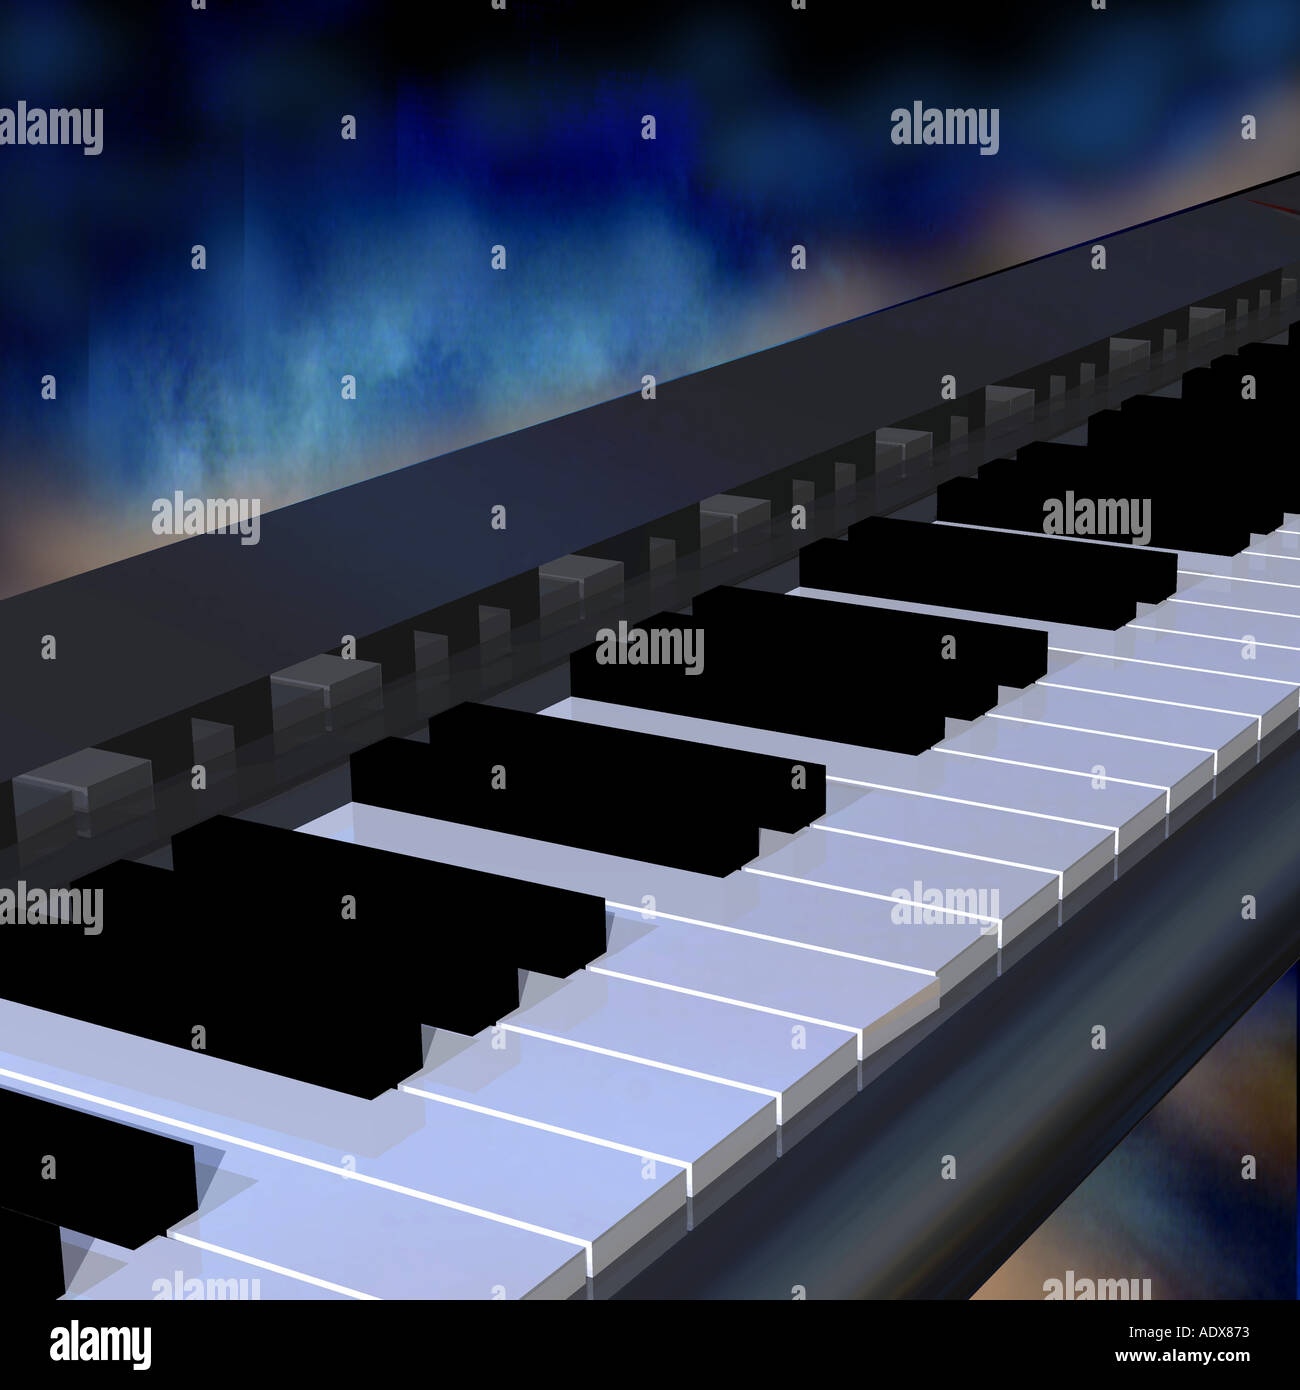 Illustrations piano rendered virtual image music art detail background texture miscellaneous musical instrument Stock Photo